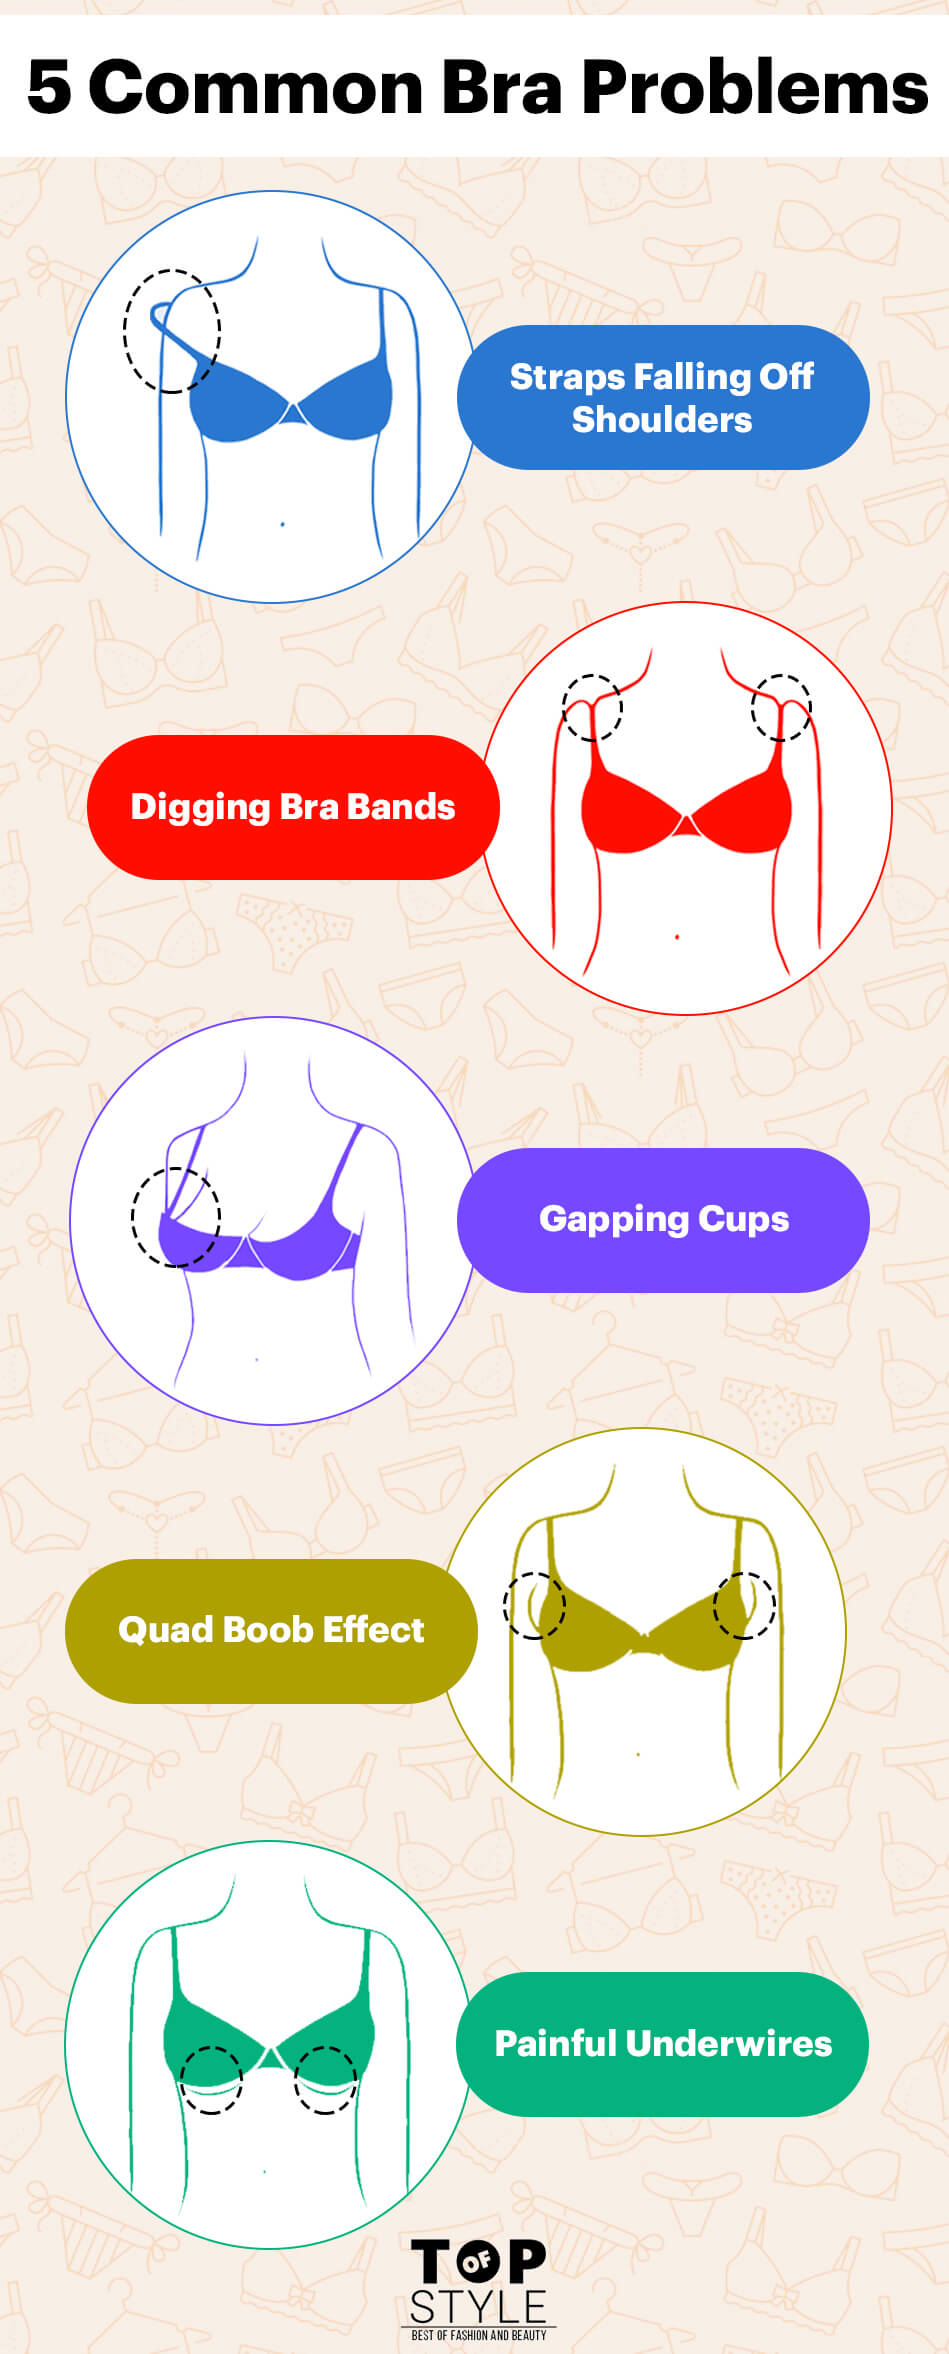 Buying a Bra for your Girlfriend? 8 Tips Every Man Should Consider -  TopOfStyle Blog